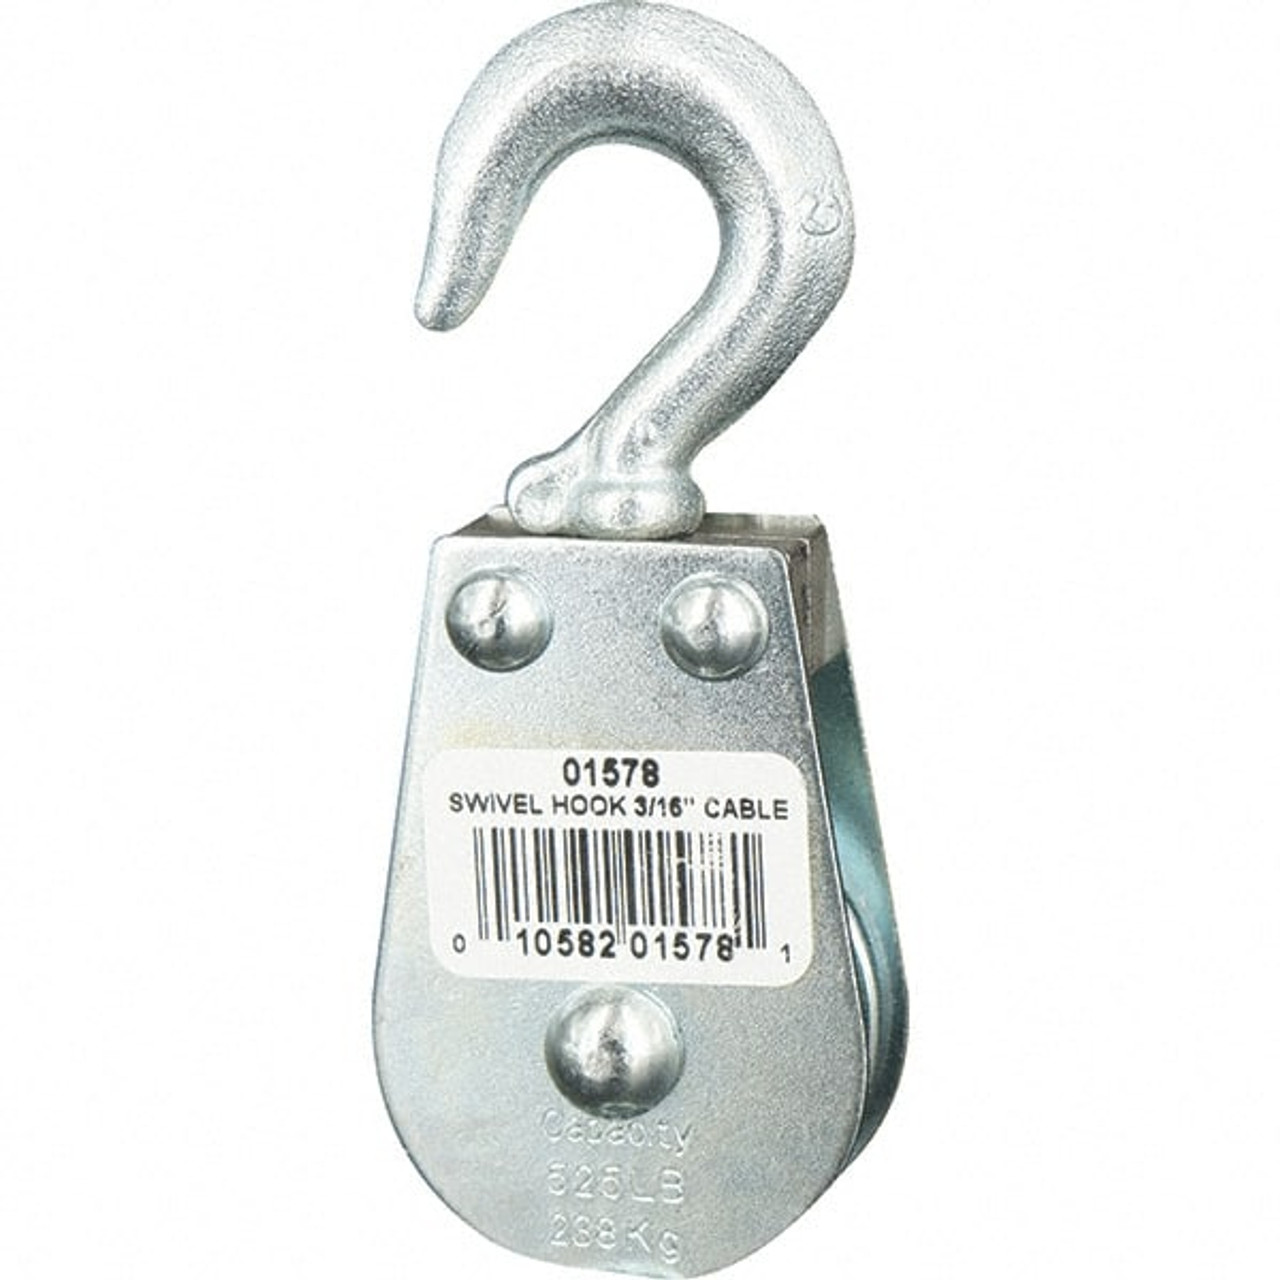 Block Division 525 Lbs. Load Limit, Swivel Hook Block Single Sheave, 1-1/2  Inch Outside Diameter, Wire Rope, 3/16 Inch Diameter, Eye, 3/8 Inch Inside  Diameter, Carbon Steel, Zinc Plated Finish 01578-C - 67326769 - Penn Tool  Co., Inc